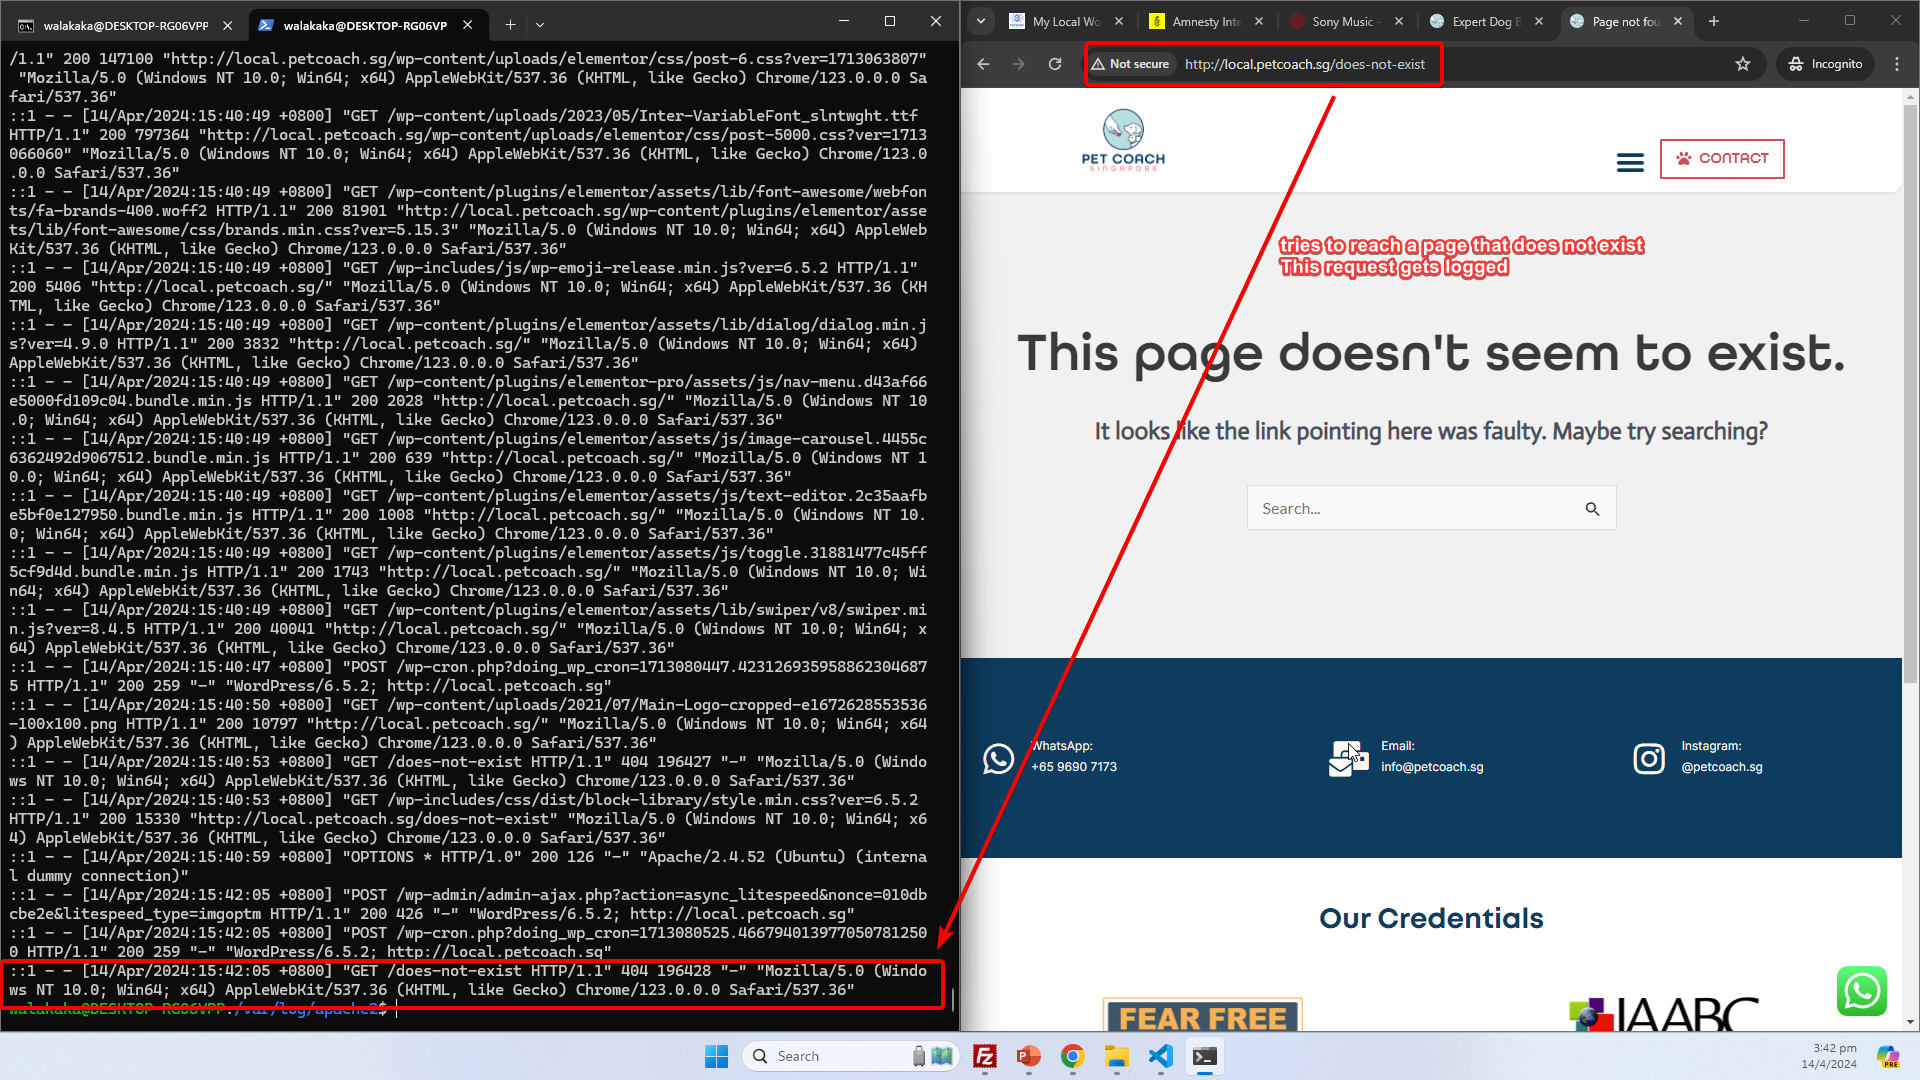 image showing example of user accessing 404 page, and logs being displayed in real-time